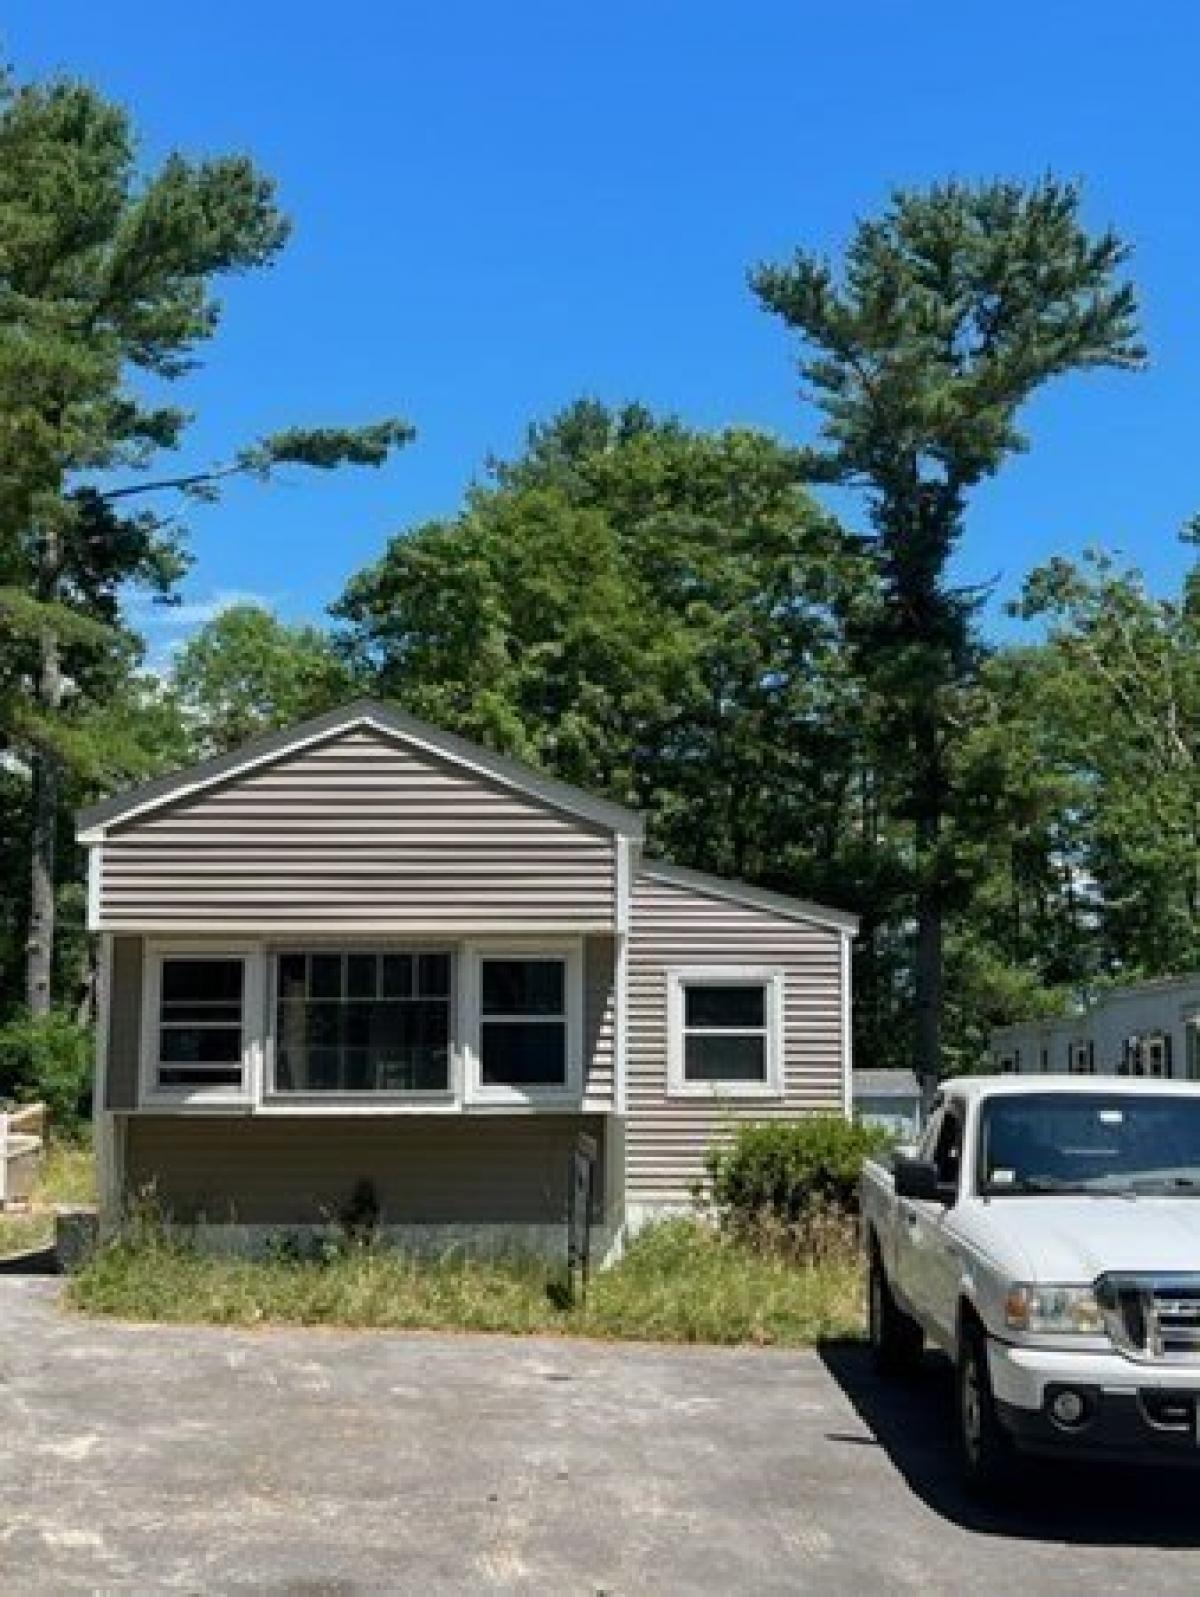 Picture of Home For Sale in Wareham, Massachusetts, United States